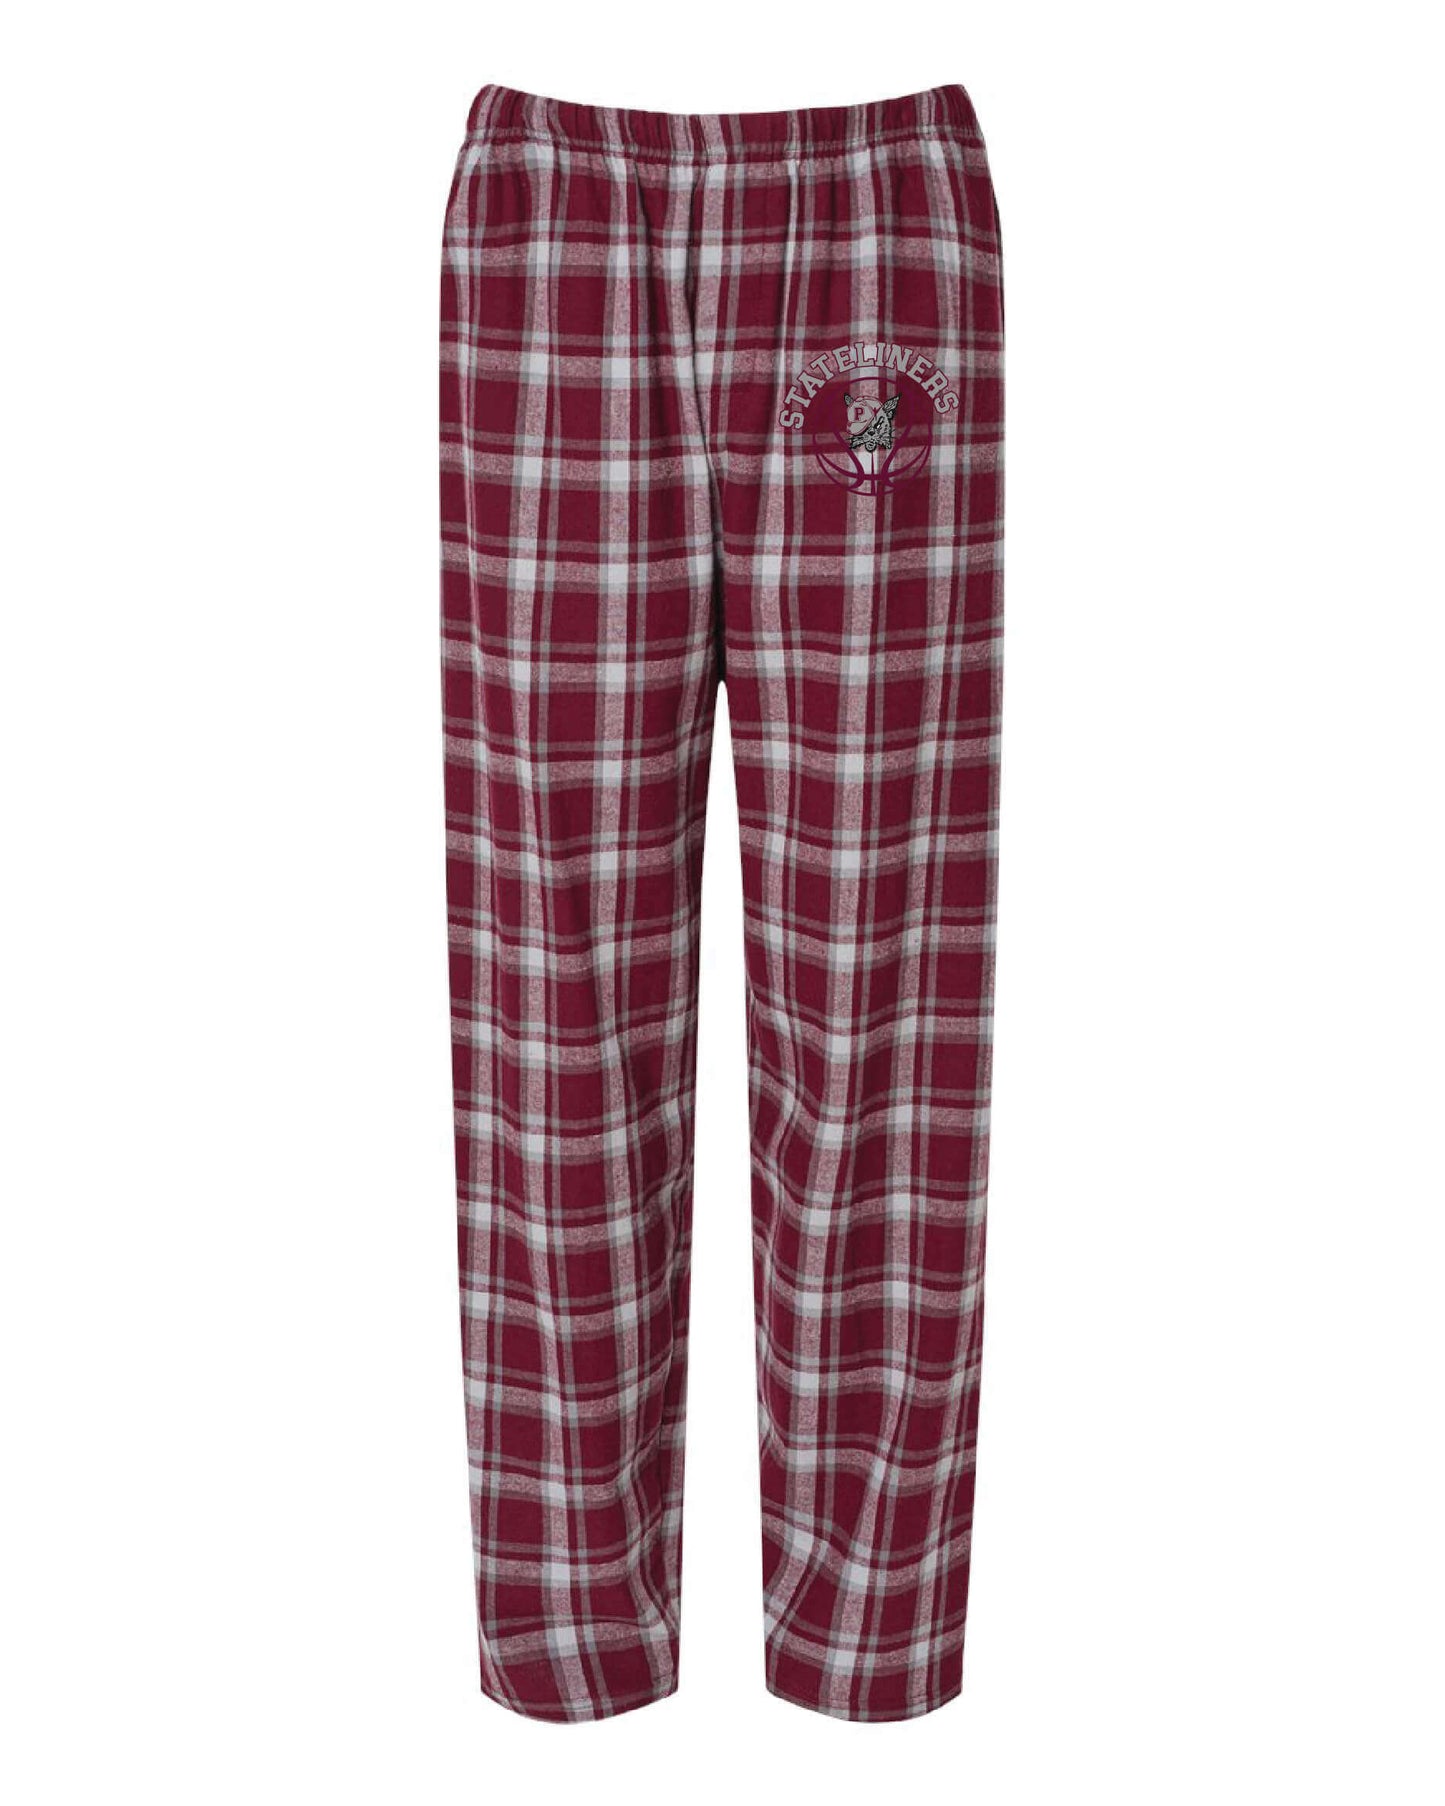 Flannel Pants Stateliners